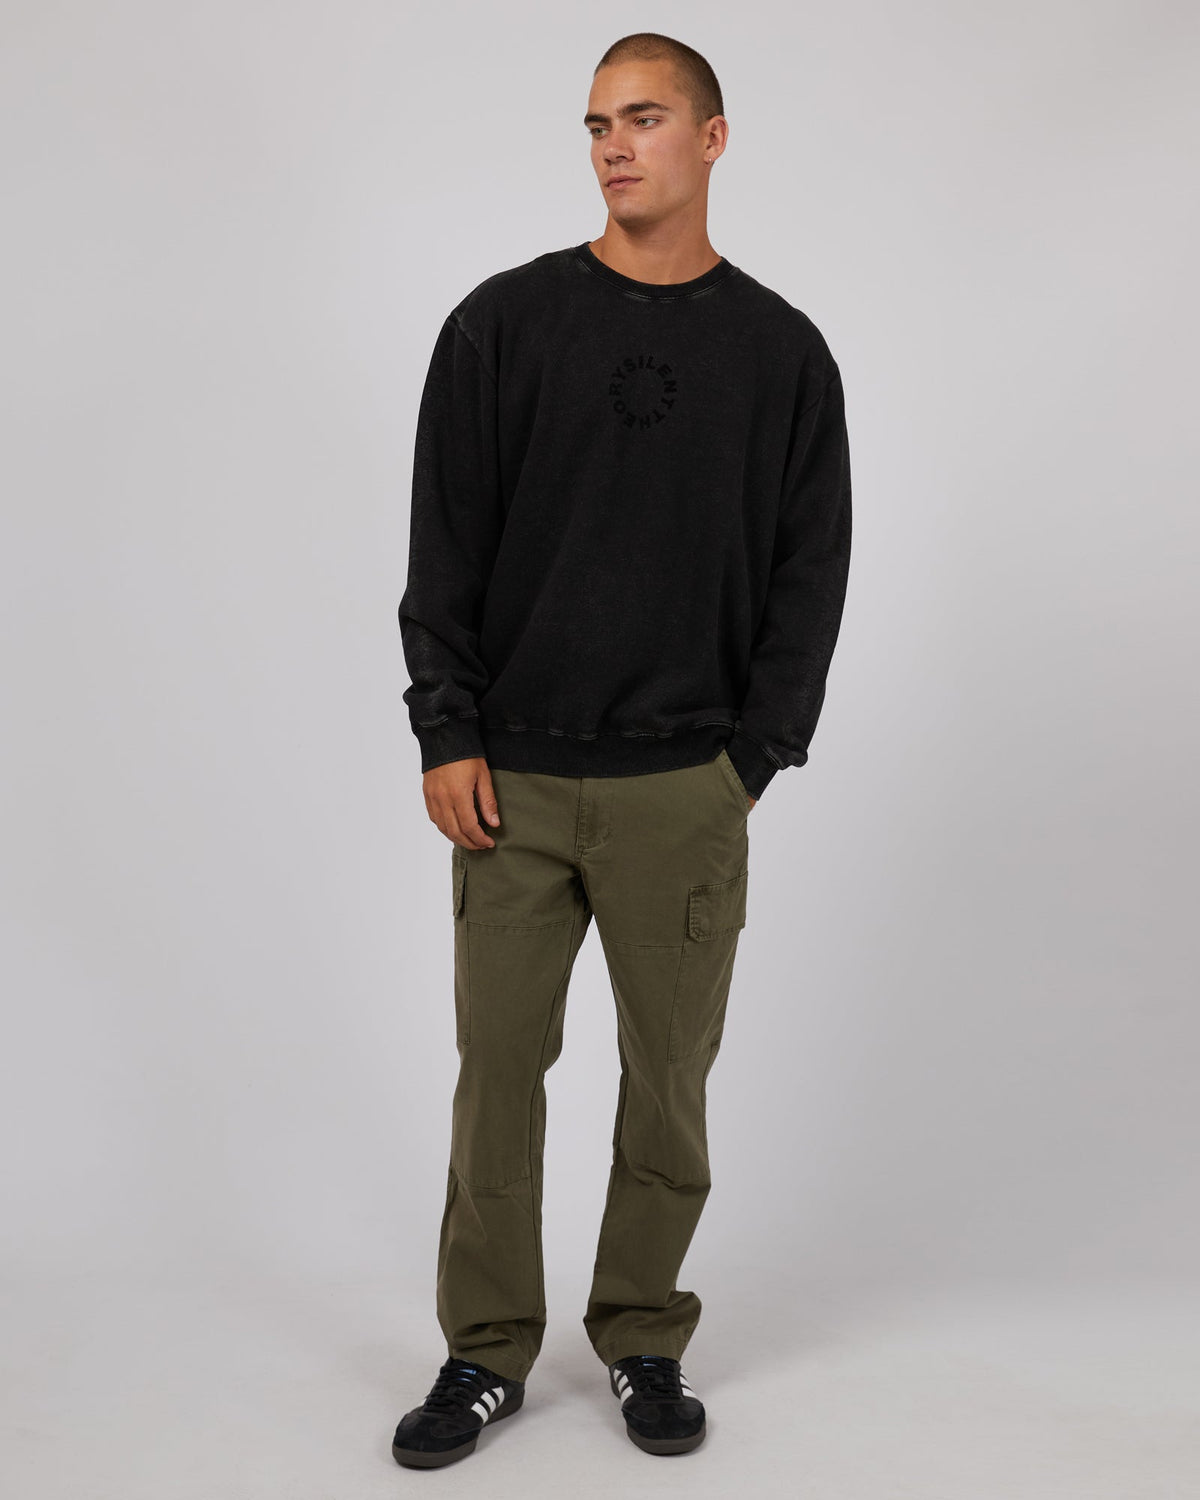 Silent Theory-Gibson Jumper Washed Black-Edge Clothing